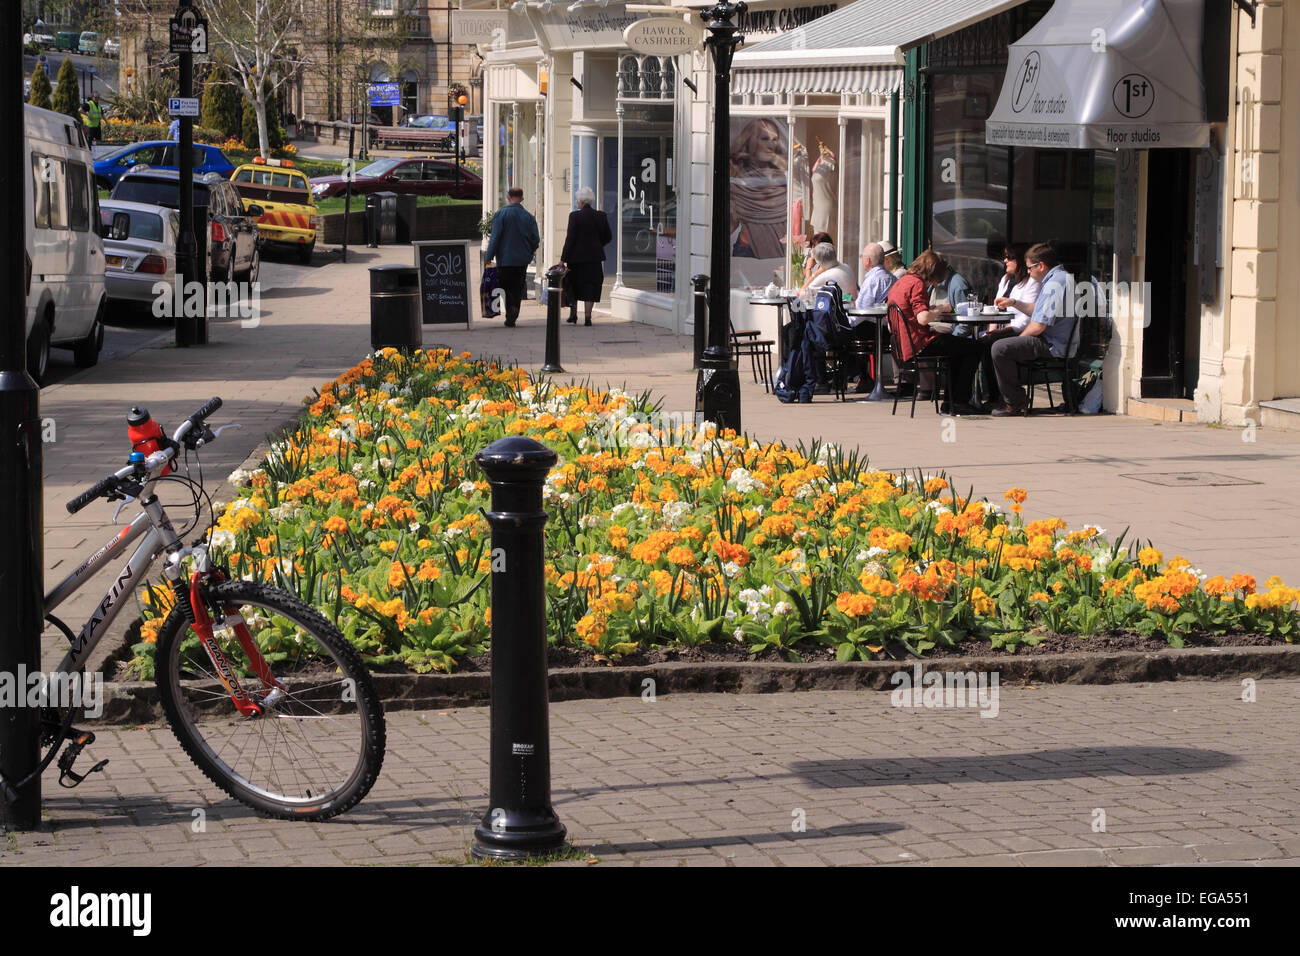 Montpelier Parade in the sunshine with spring flowers, bicycle and pavement tables outside a cafe / Harrogate / UK Stock Photo